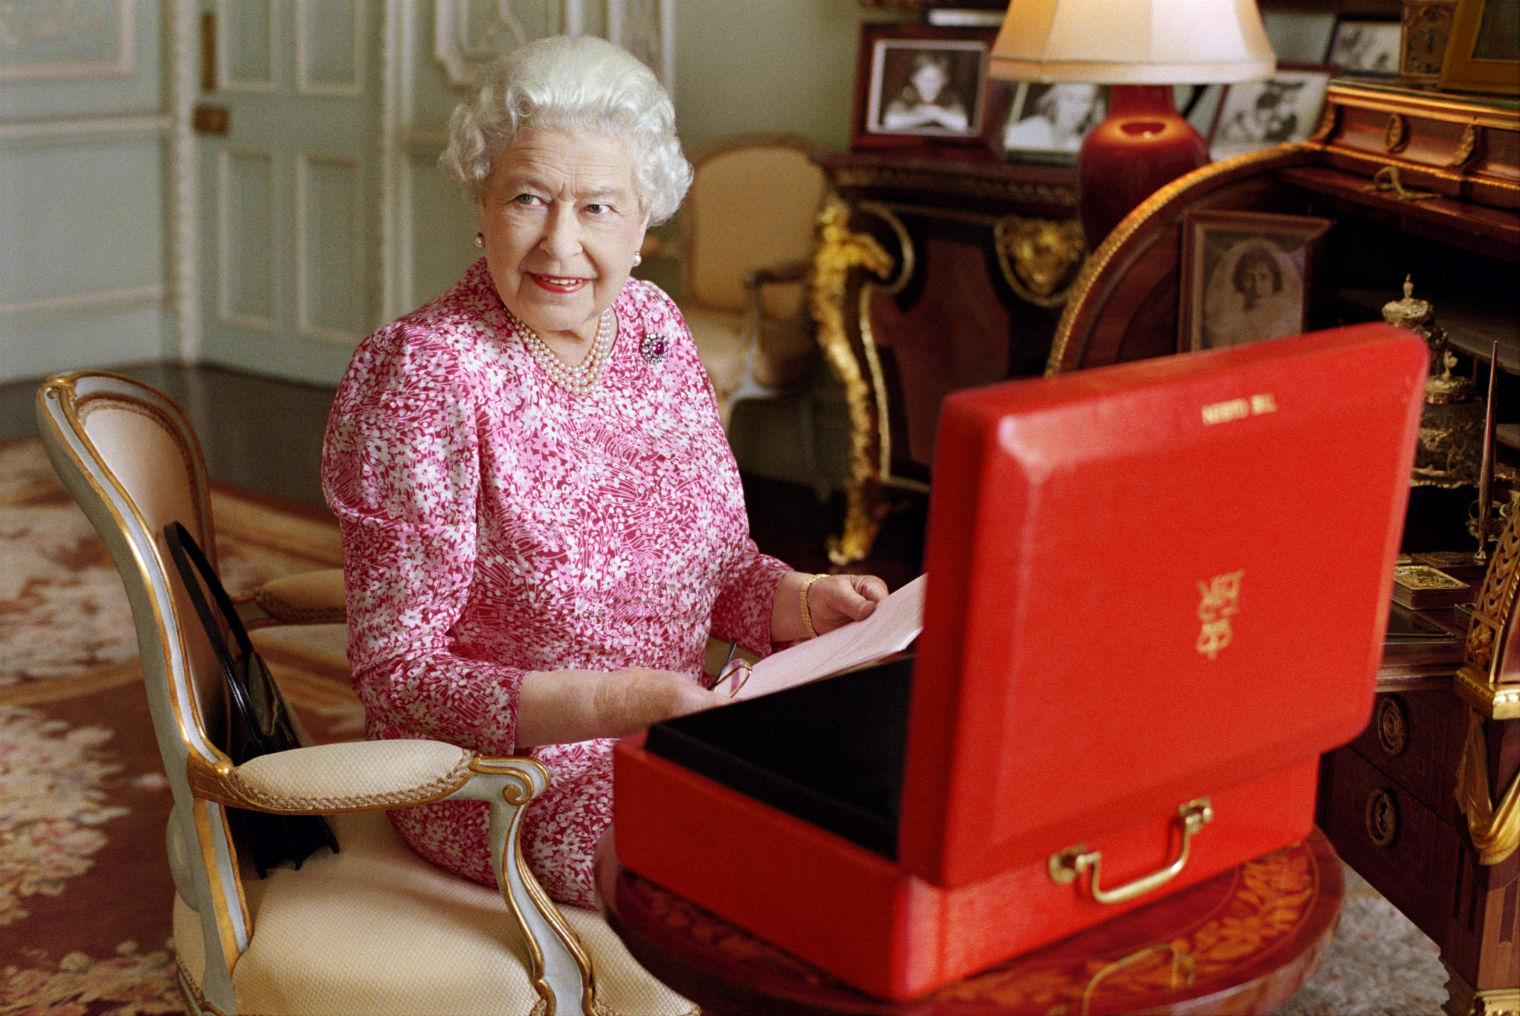 Photo by Mary McCartney/Her Majesty Queen Elizabeth II via Getty Images